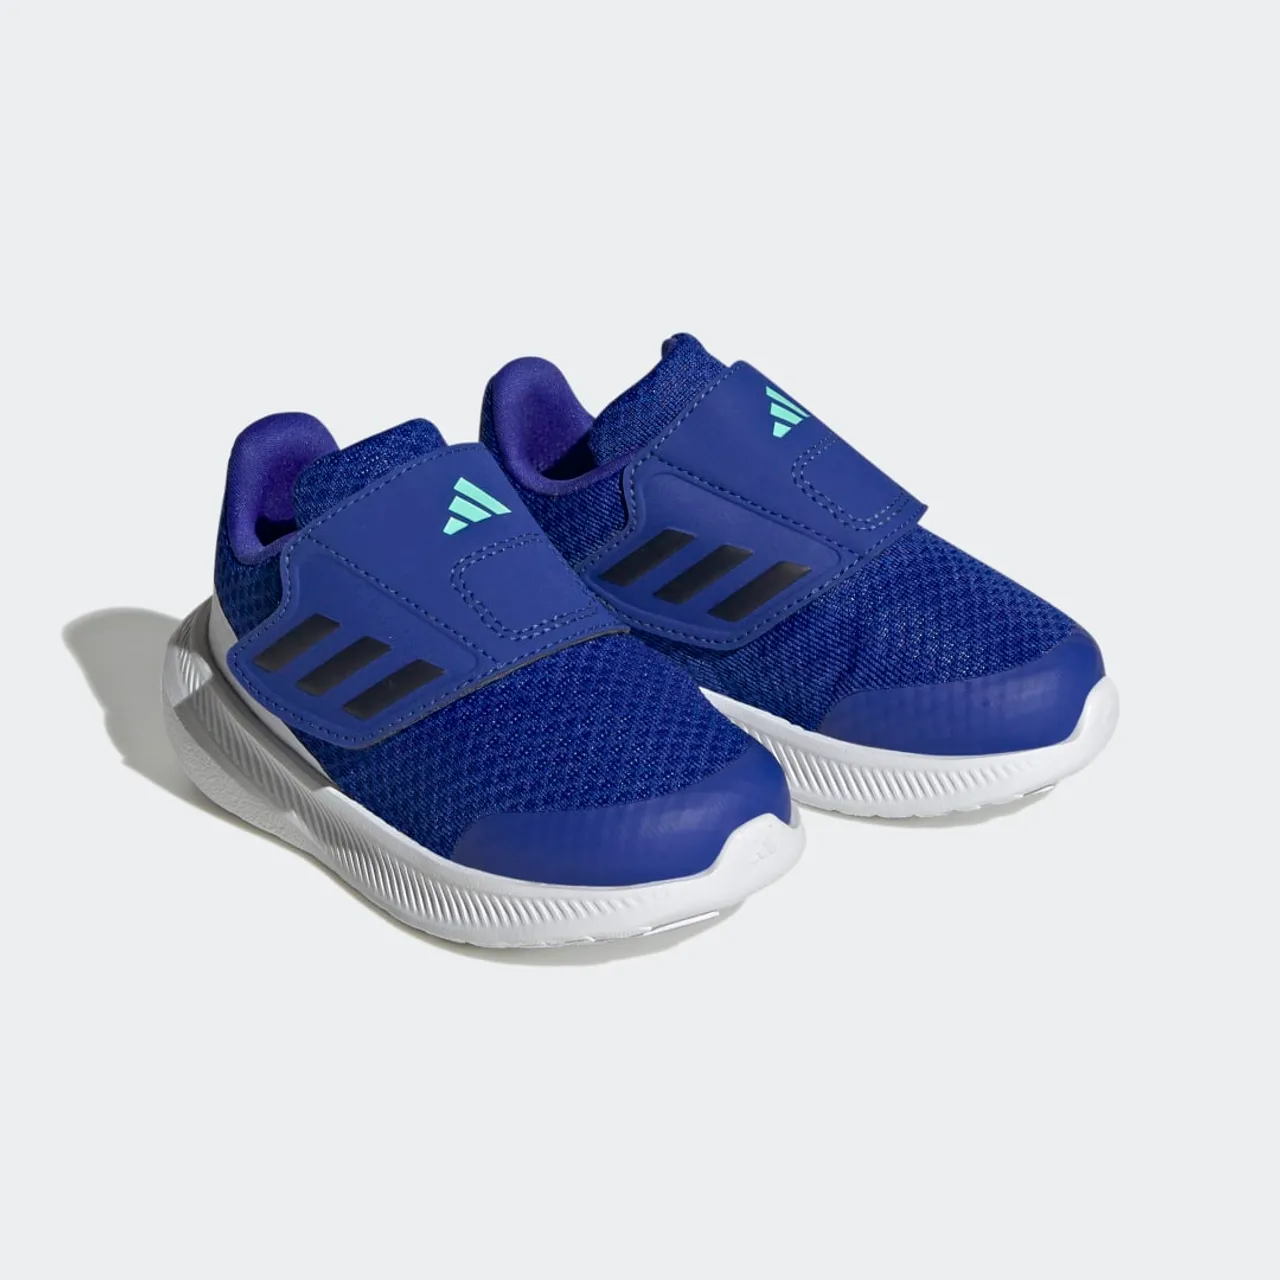 RunFalcon 3.0 Hook-and-Loop Shoes